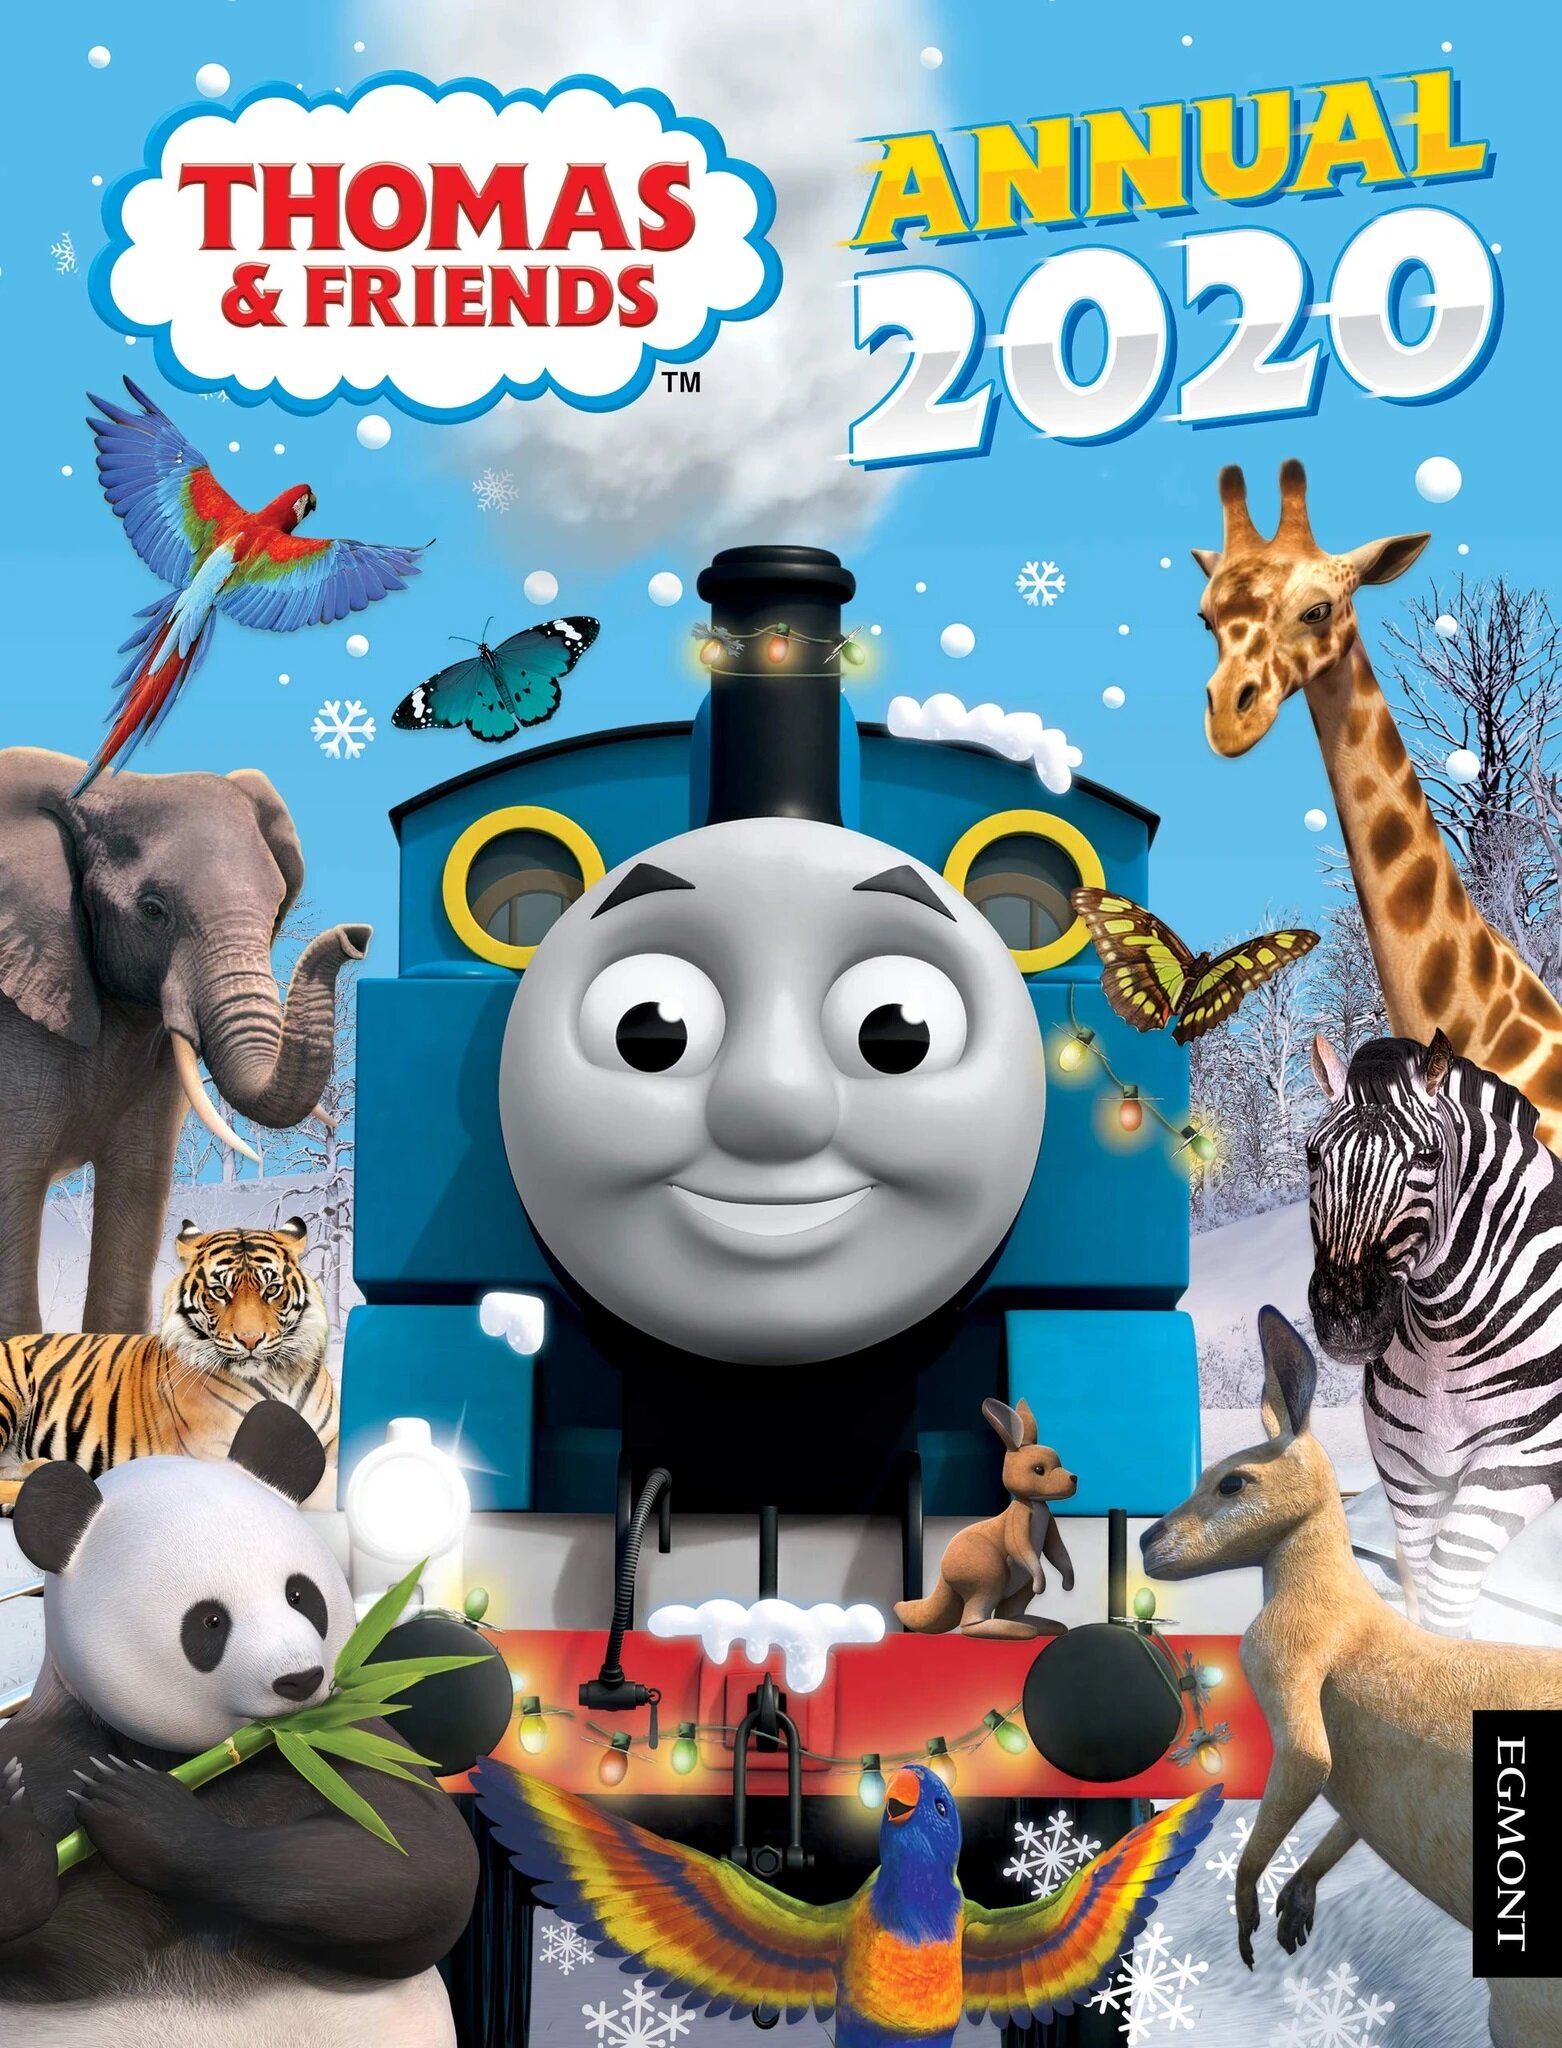 Thomas & Friends Annual 2020 (Hardcover)